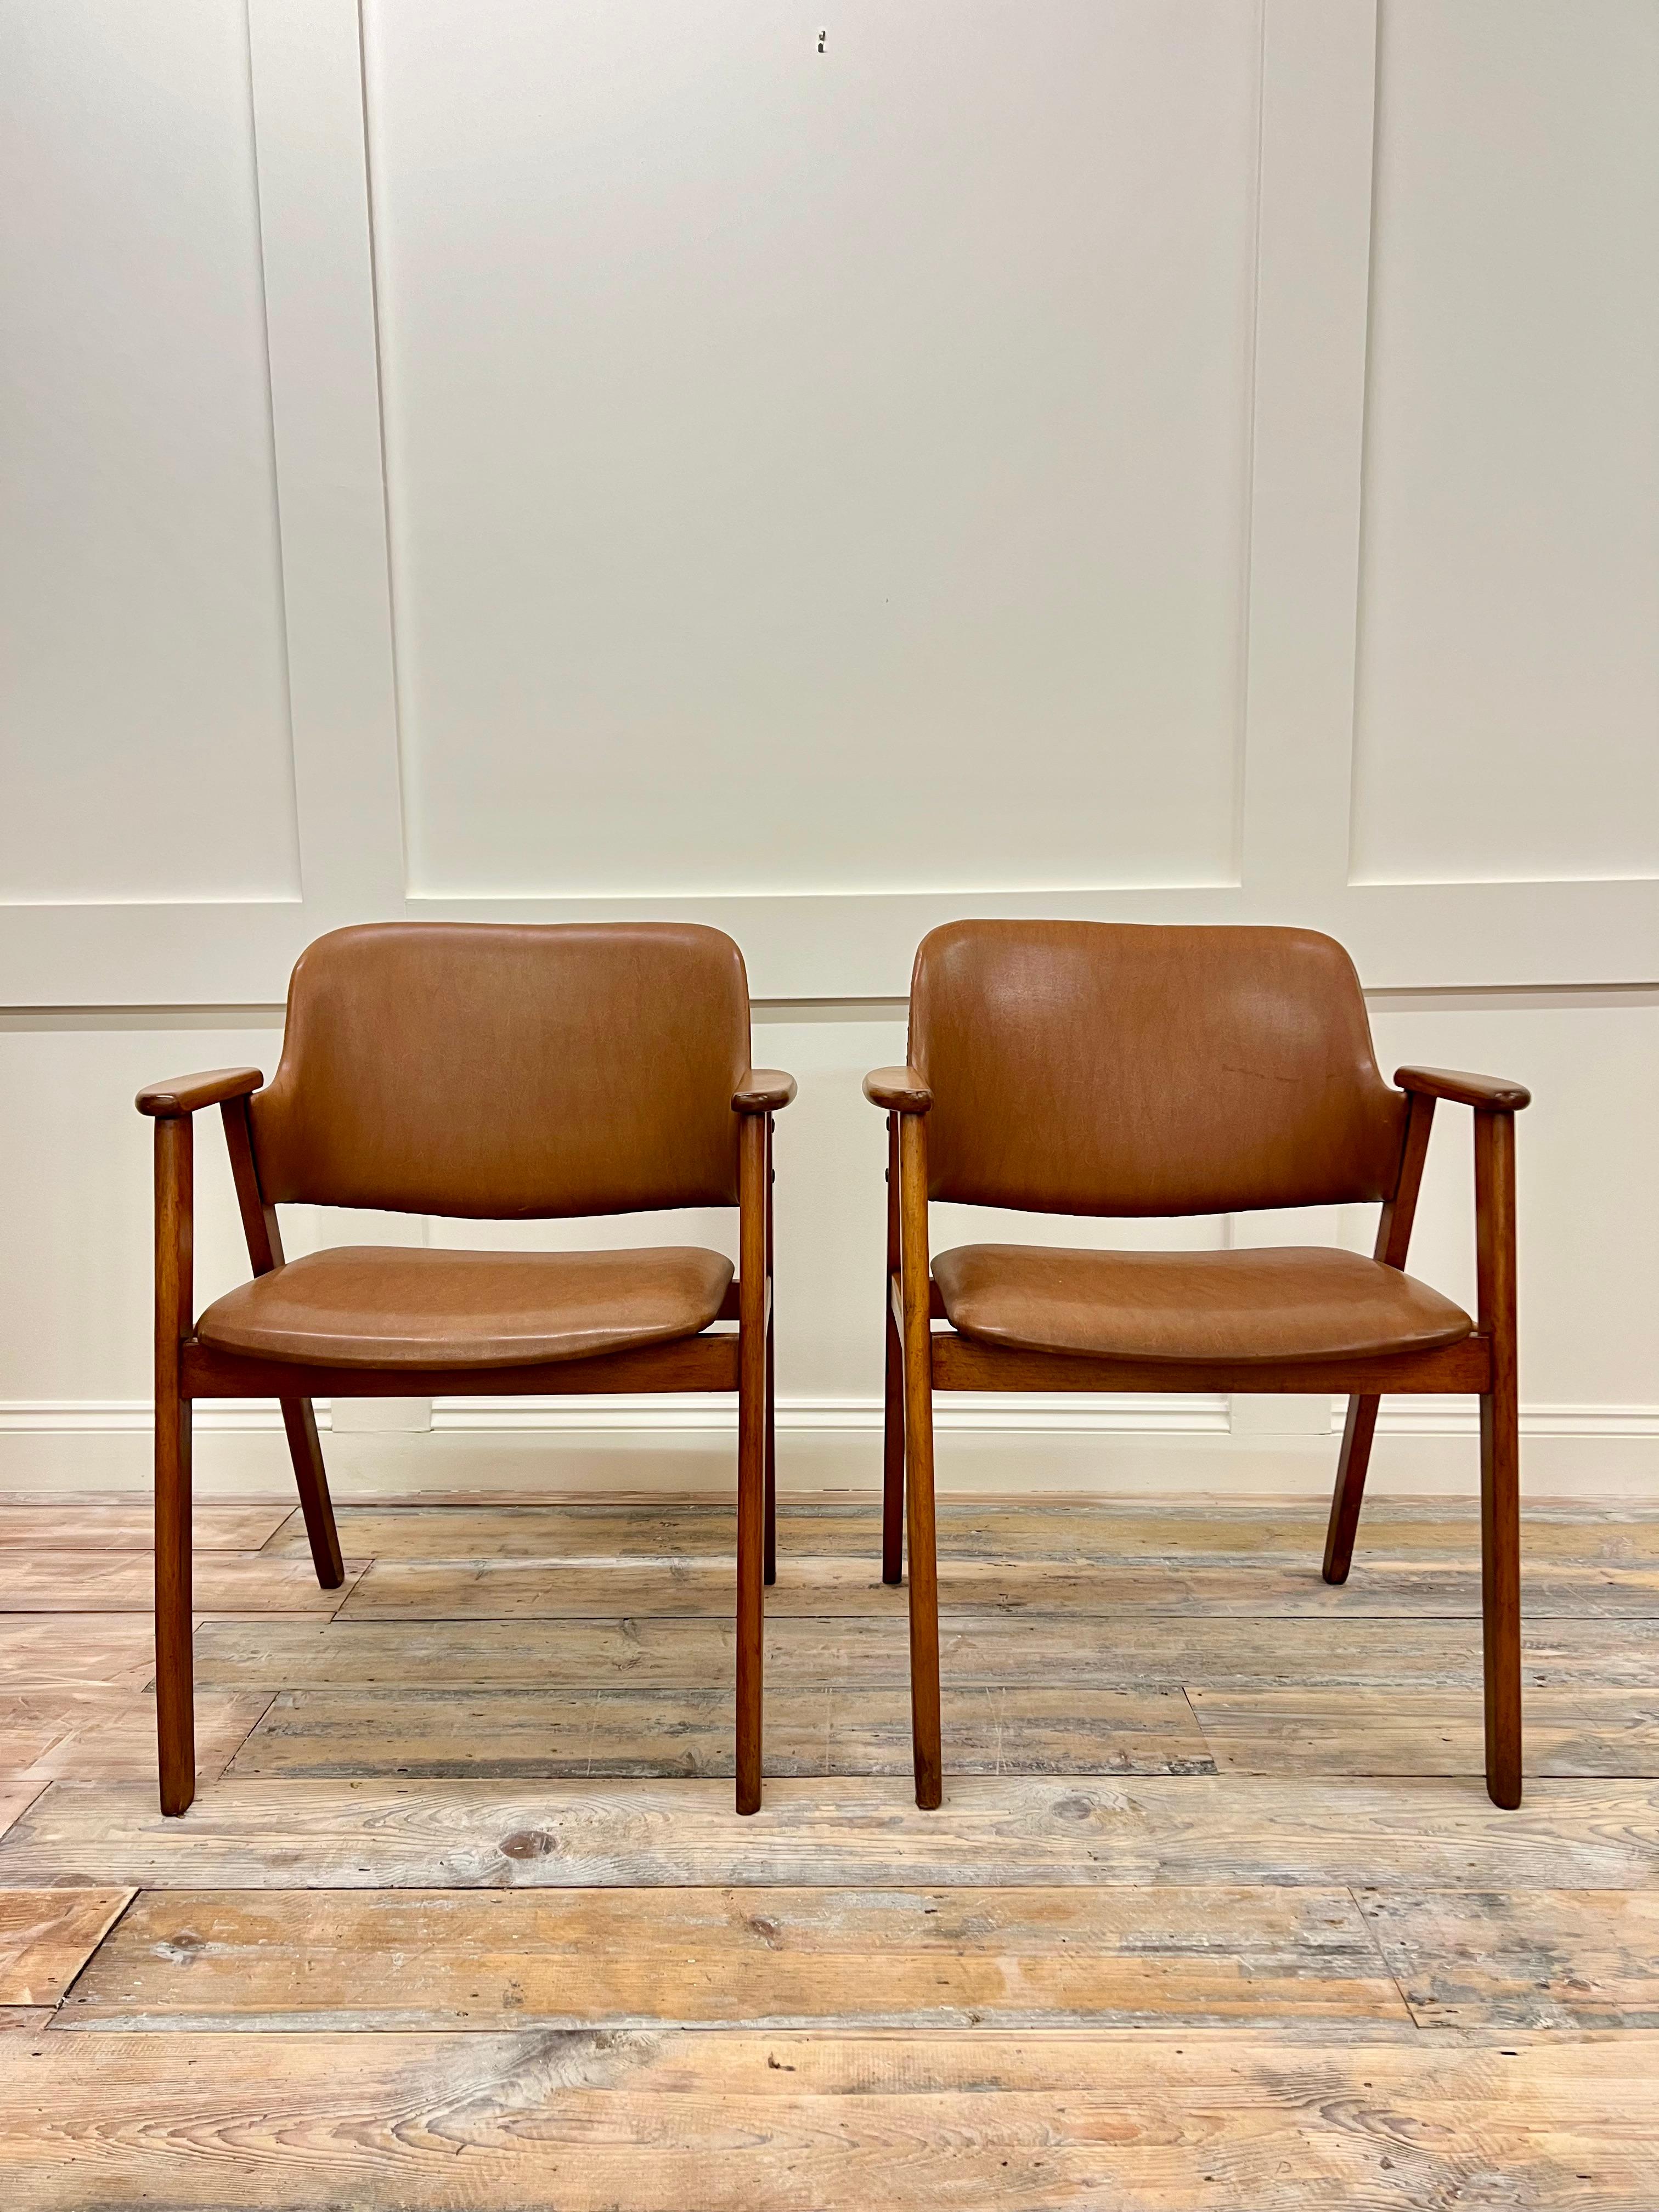 This Pair of mid-century modern chairs were designed by Cees Braakman.
Manufactured during the 50's by UMS Pastoe in the Netherlands.
They can be used as a dining chairs or side chairs.

The legs and the armrests are made from Teak.
The seat and the